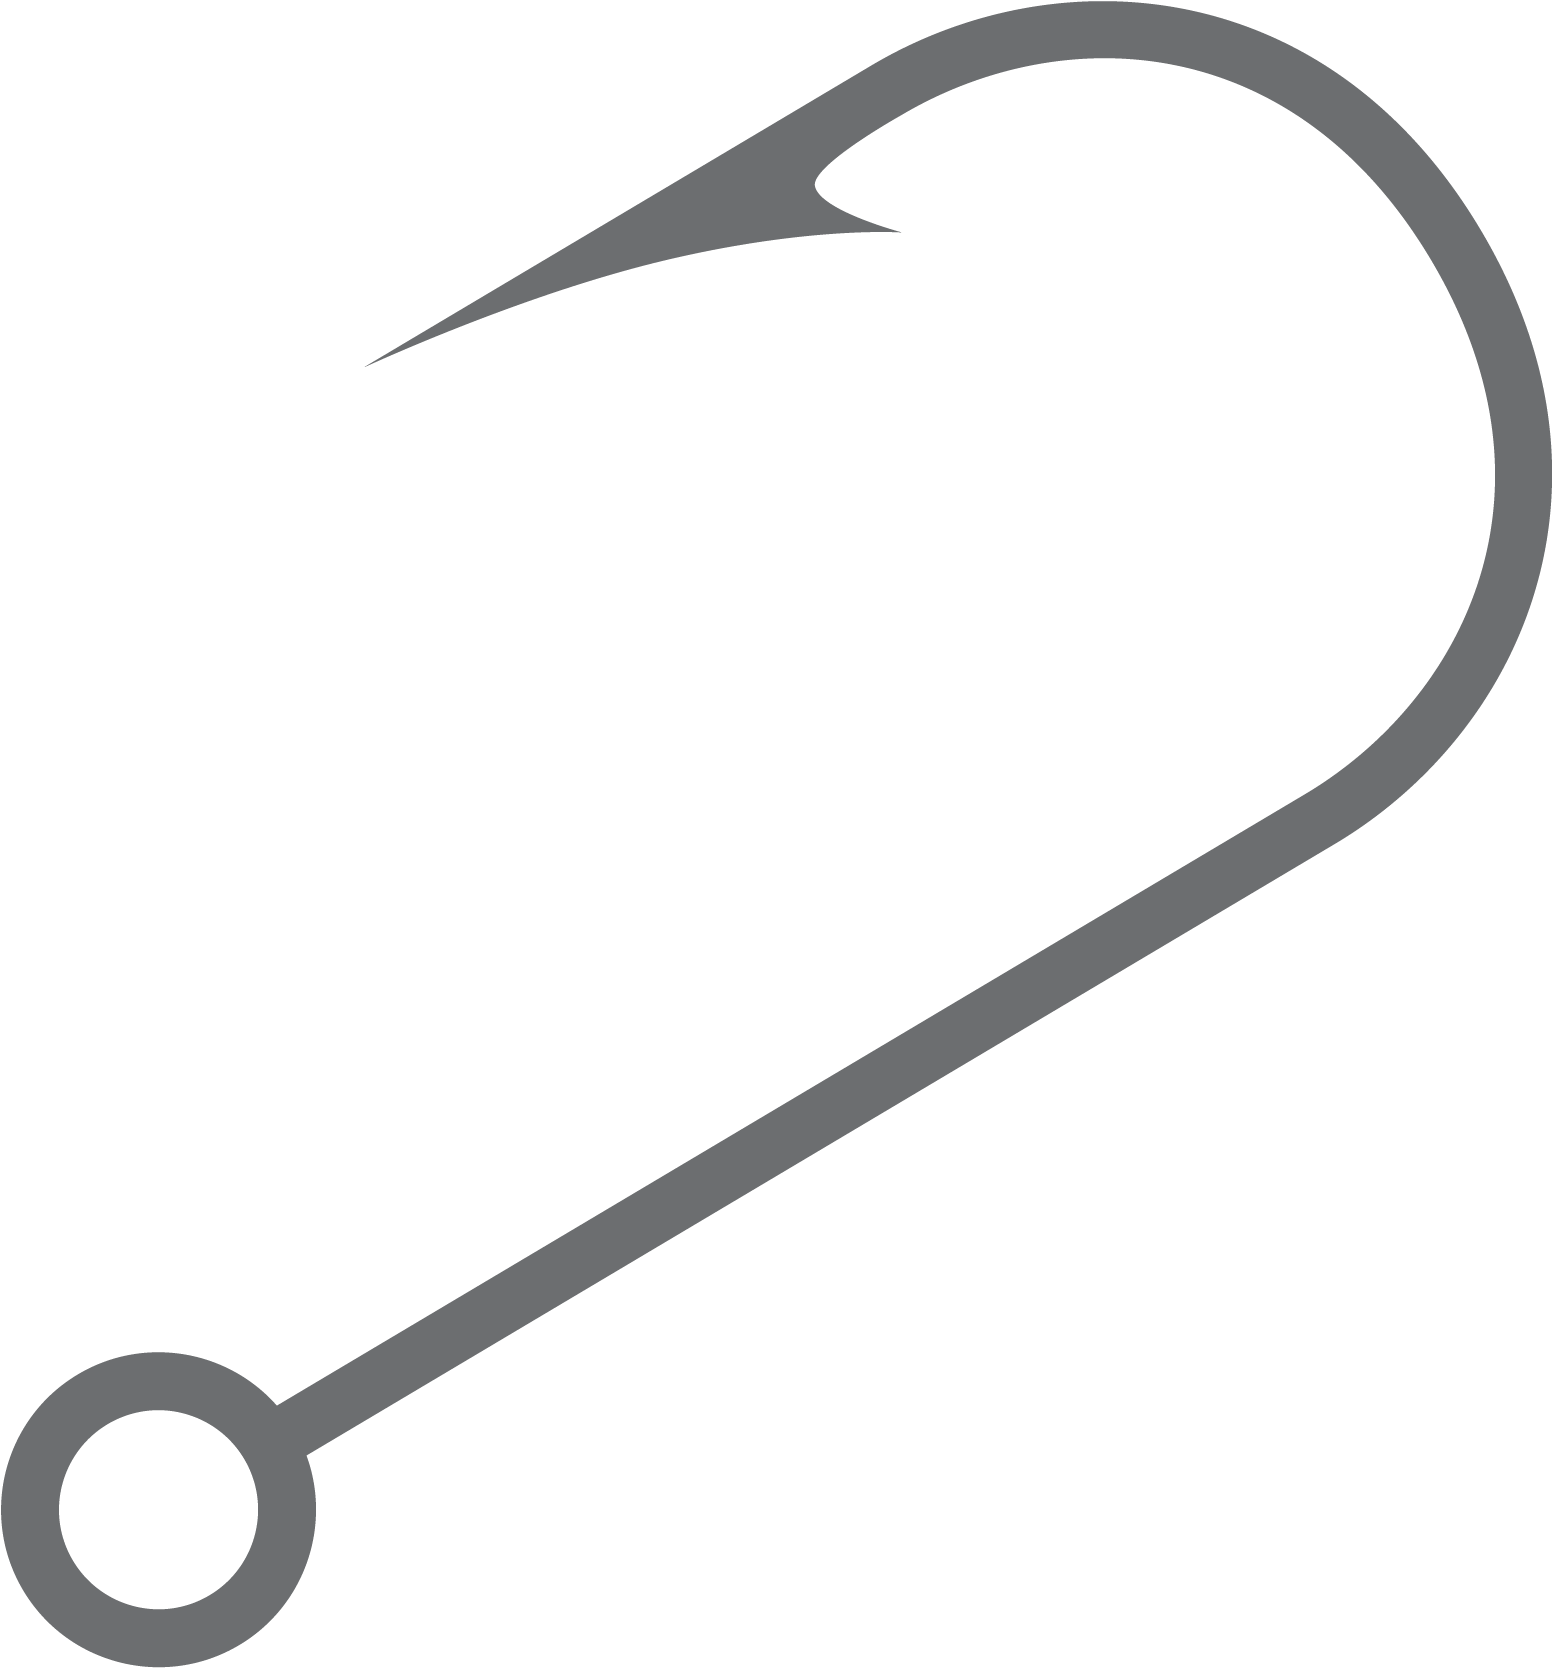 A Fishing Hook With A Circle In The Middle